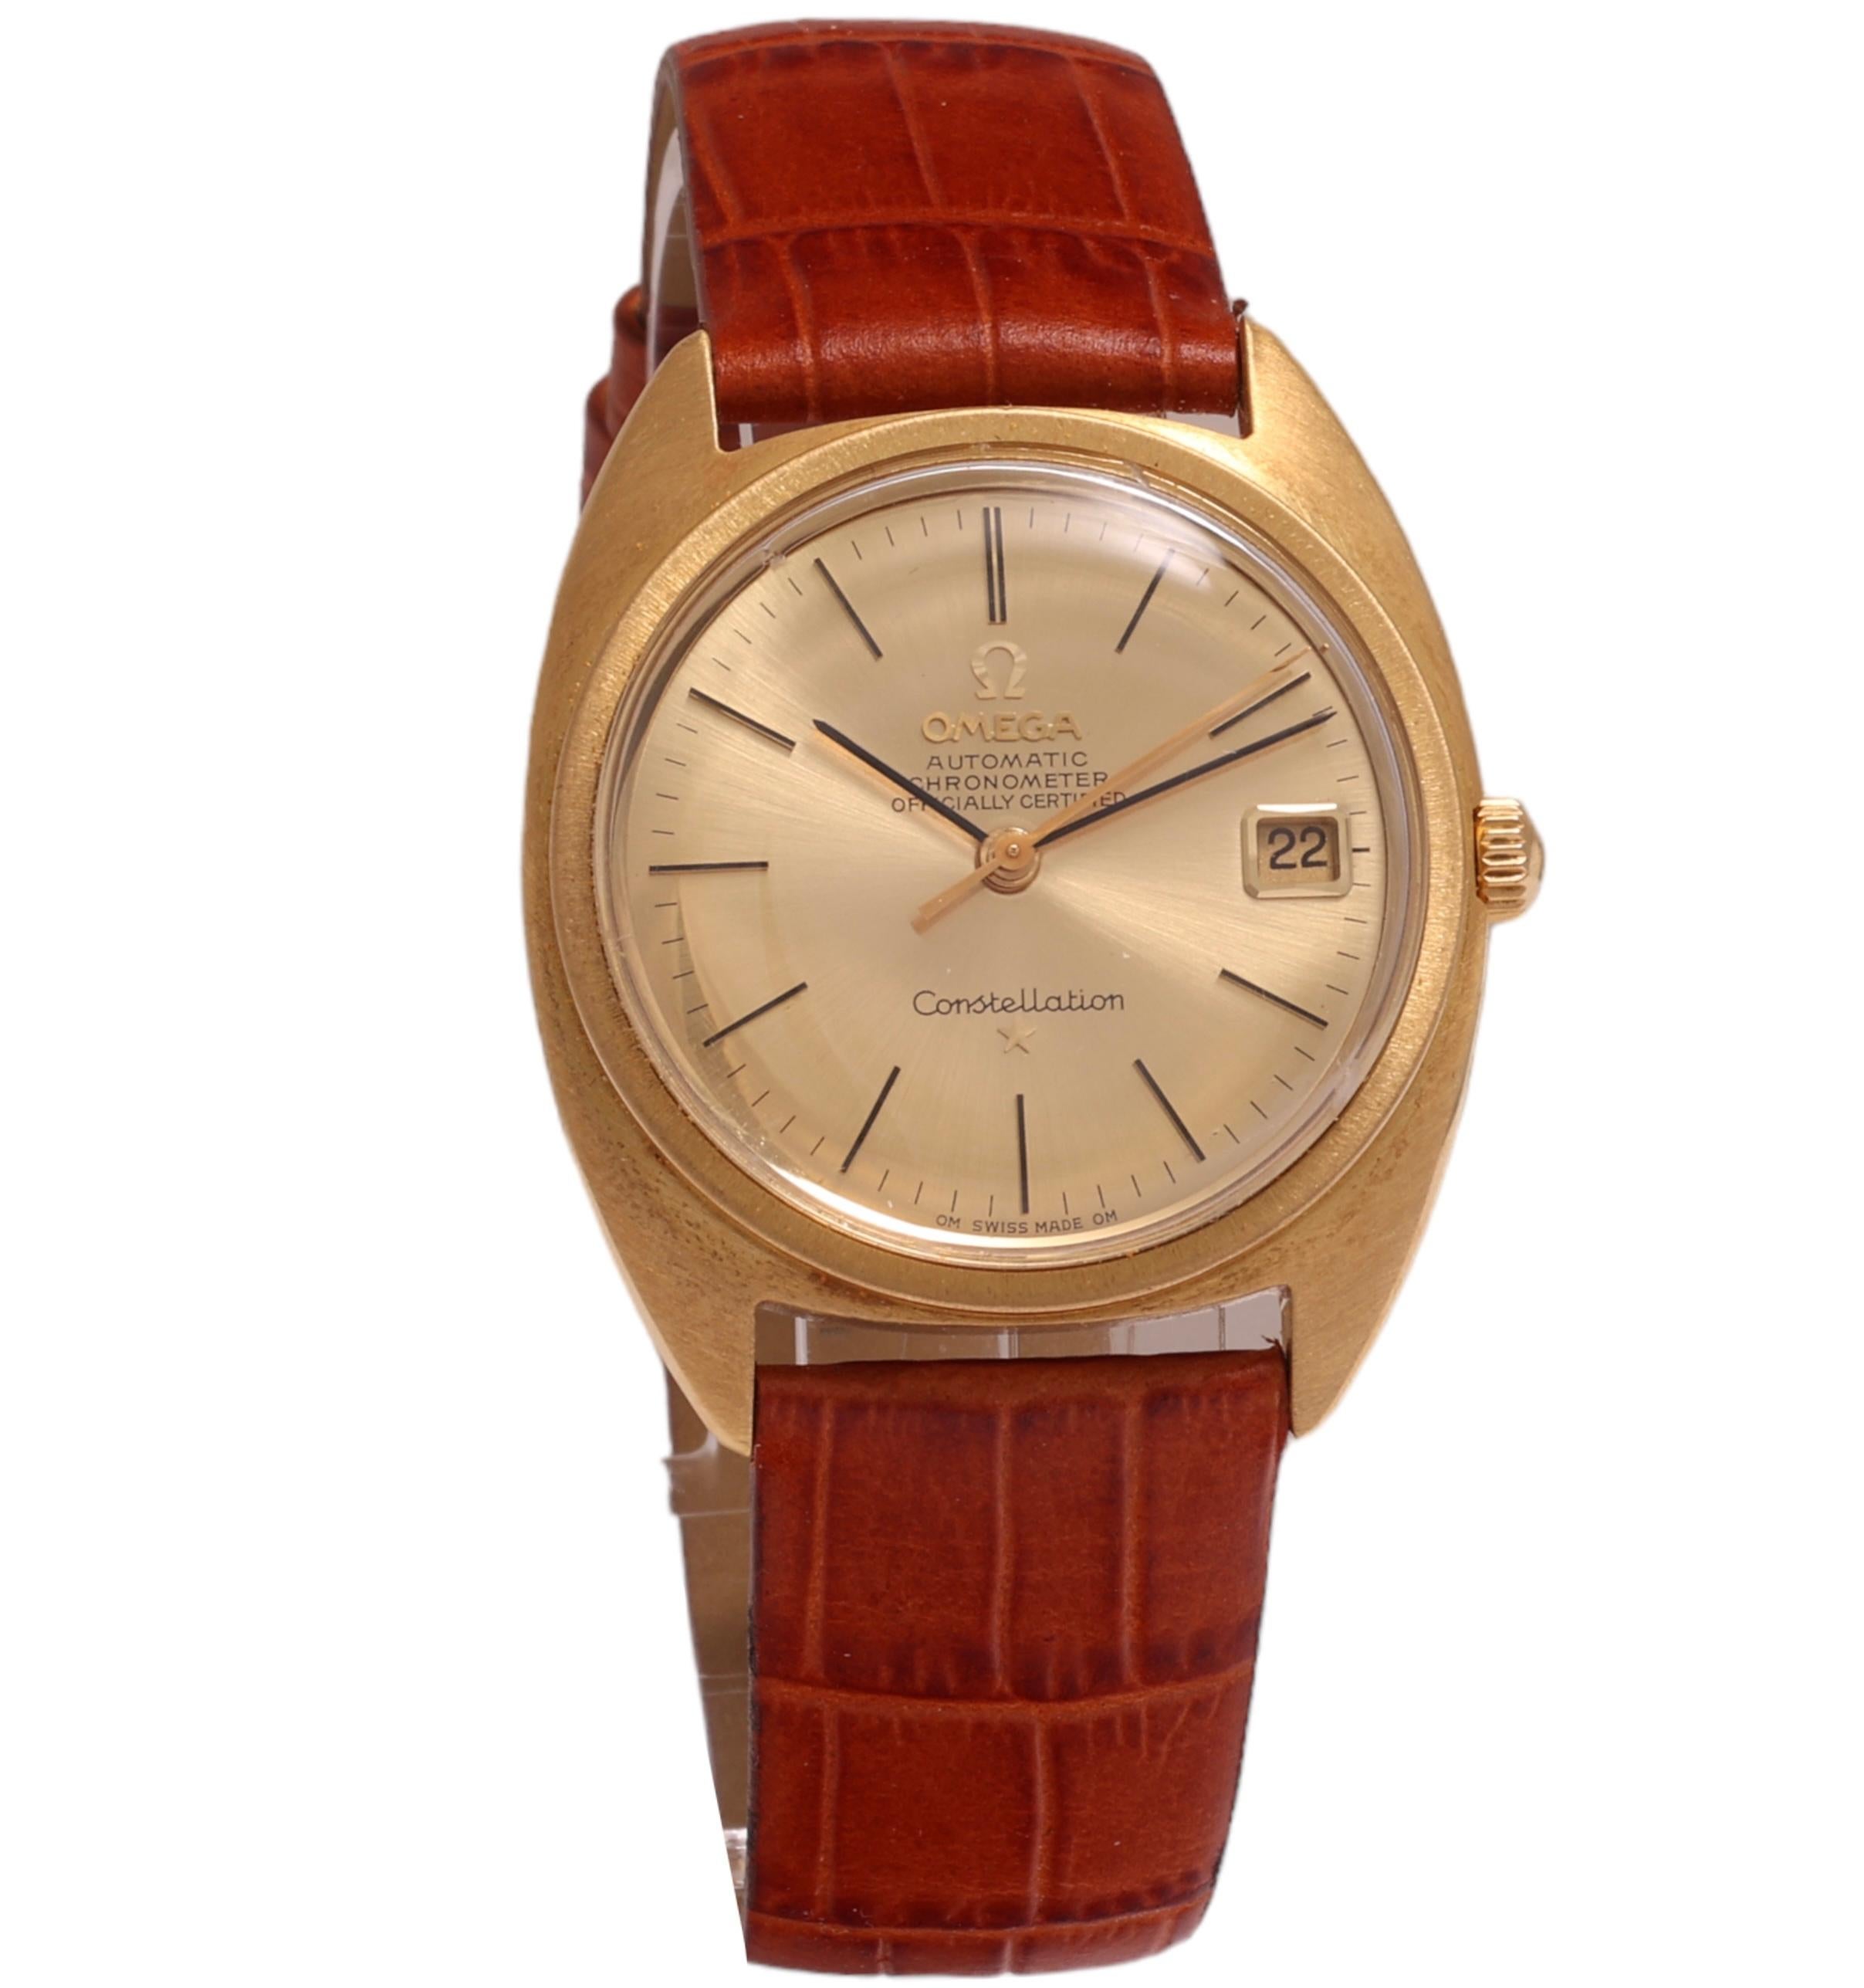 Omega Constellation Automatic Wristwatch, Caliber 564, Diameter 35 mm

Ref. number: 168.009 / 168.017

Movement: Automatic, Caliber omega 564

Functions: Hours, minutes, central seconds, date at 3 o'clock

Period: 1967

Case : 18 kt. solid gold,